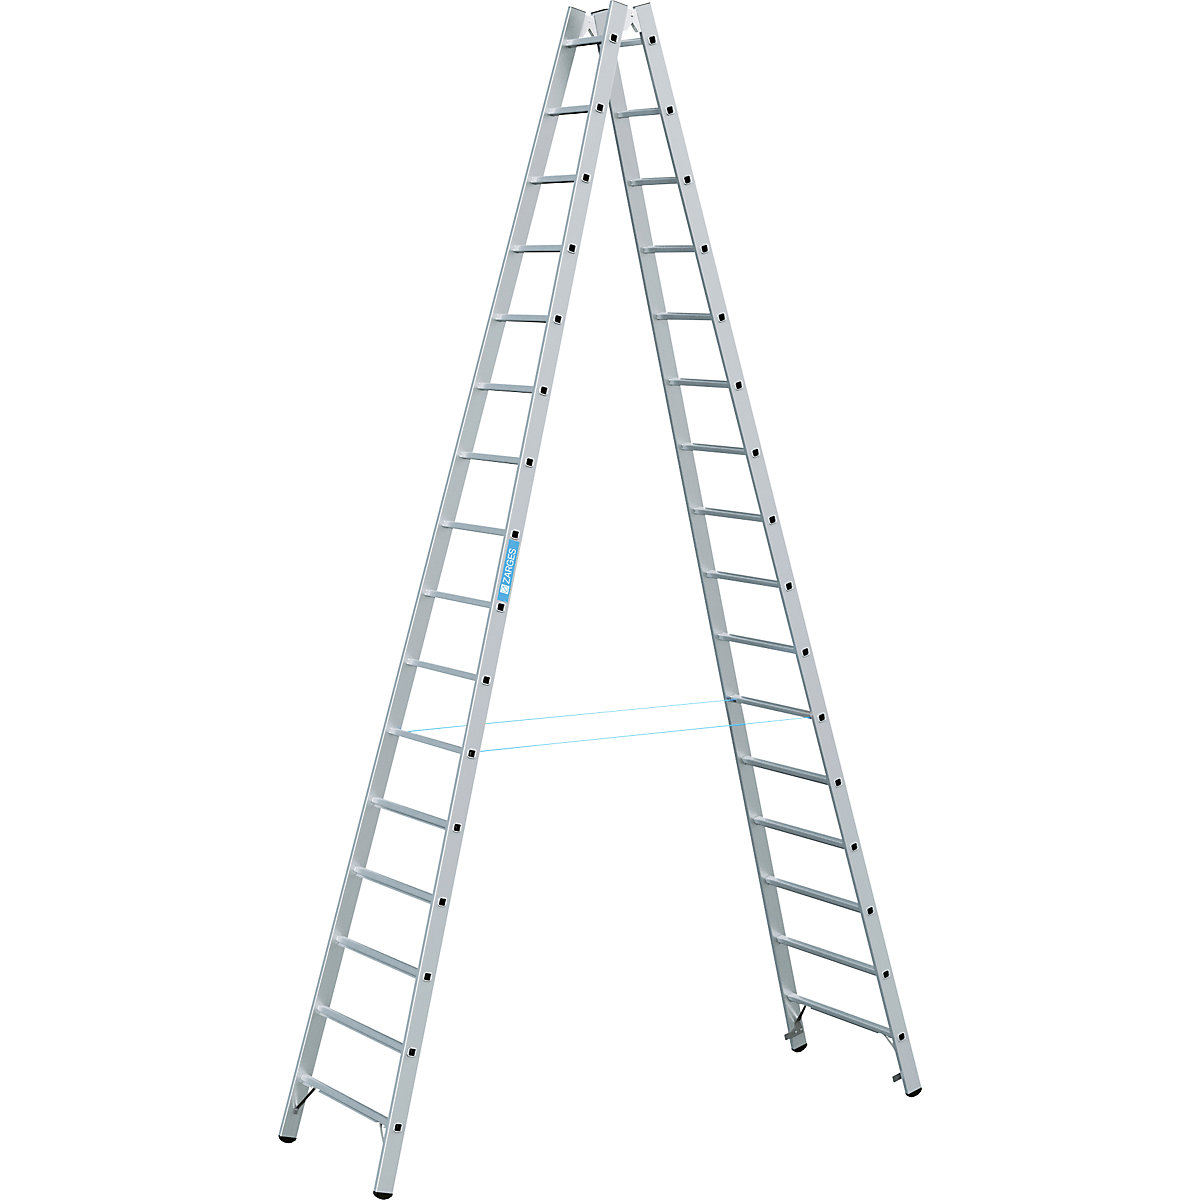 Professional rung ladder – ZARGES, double sided, 2 x 16 rungs-5